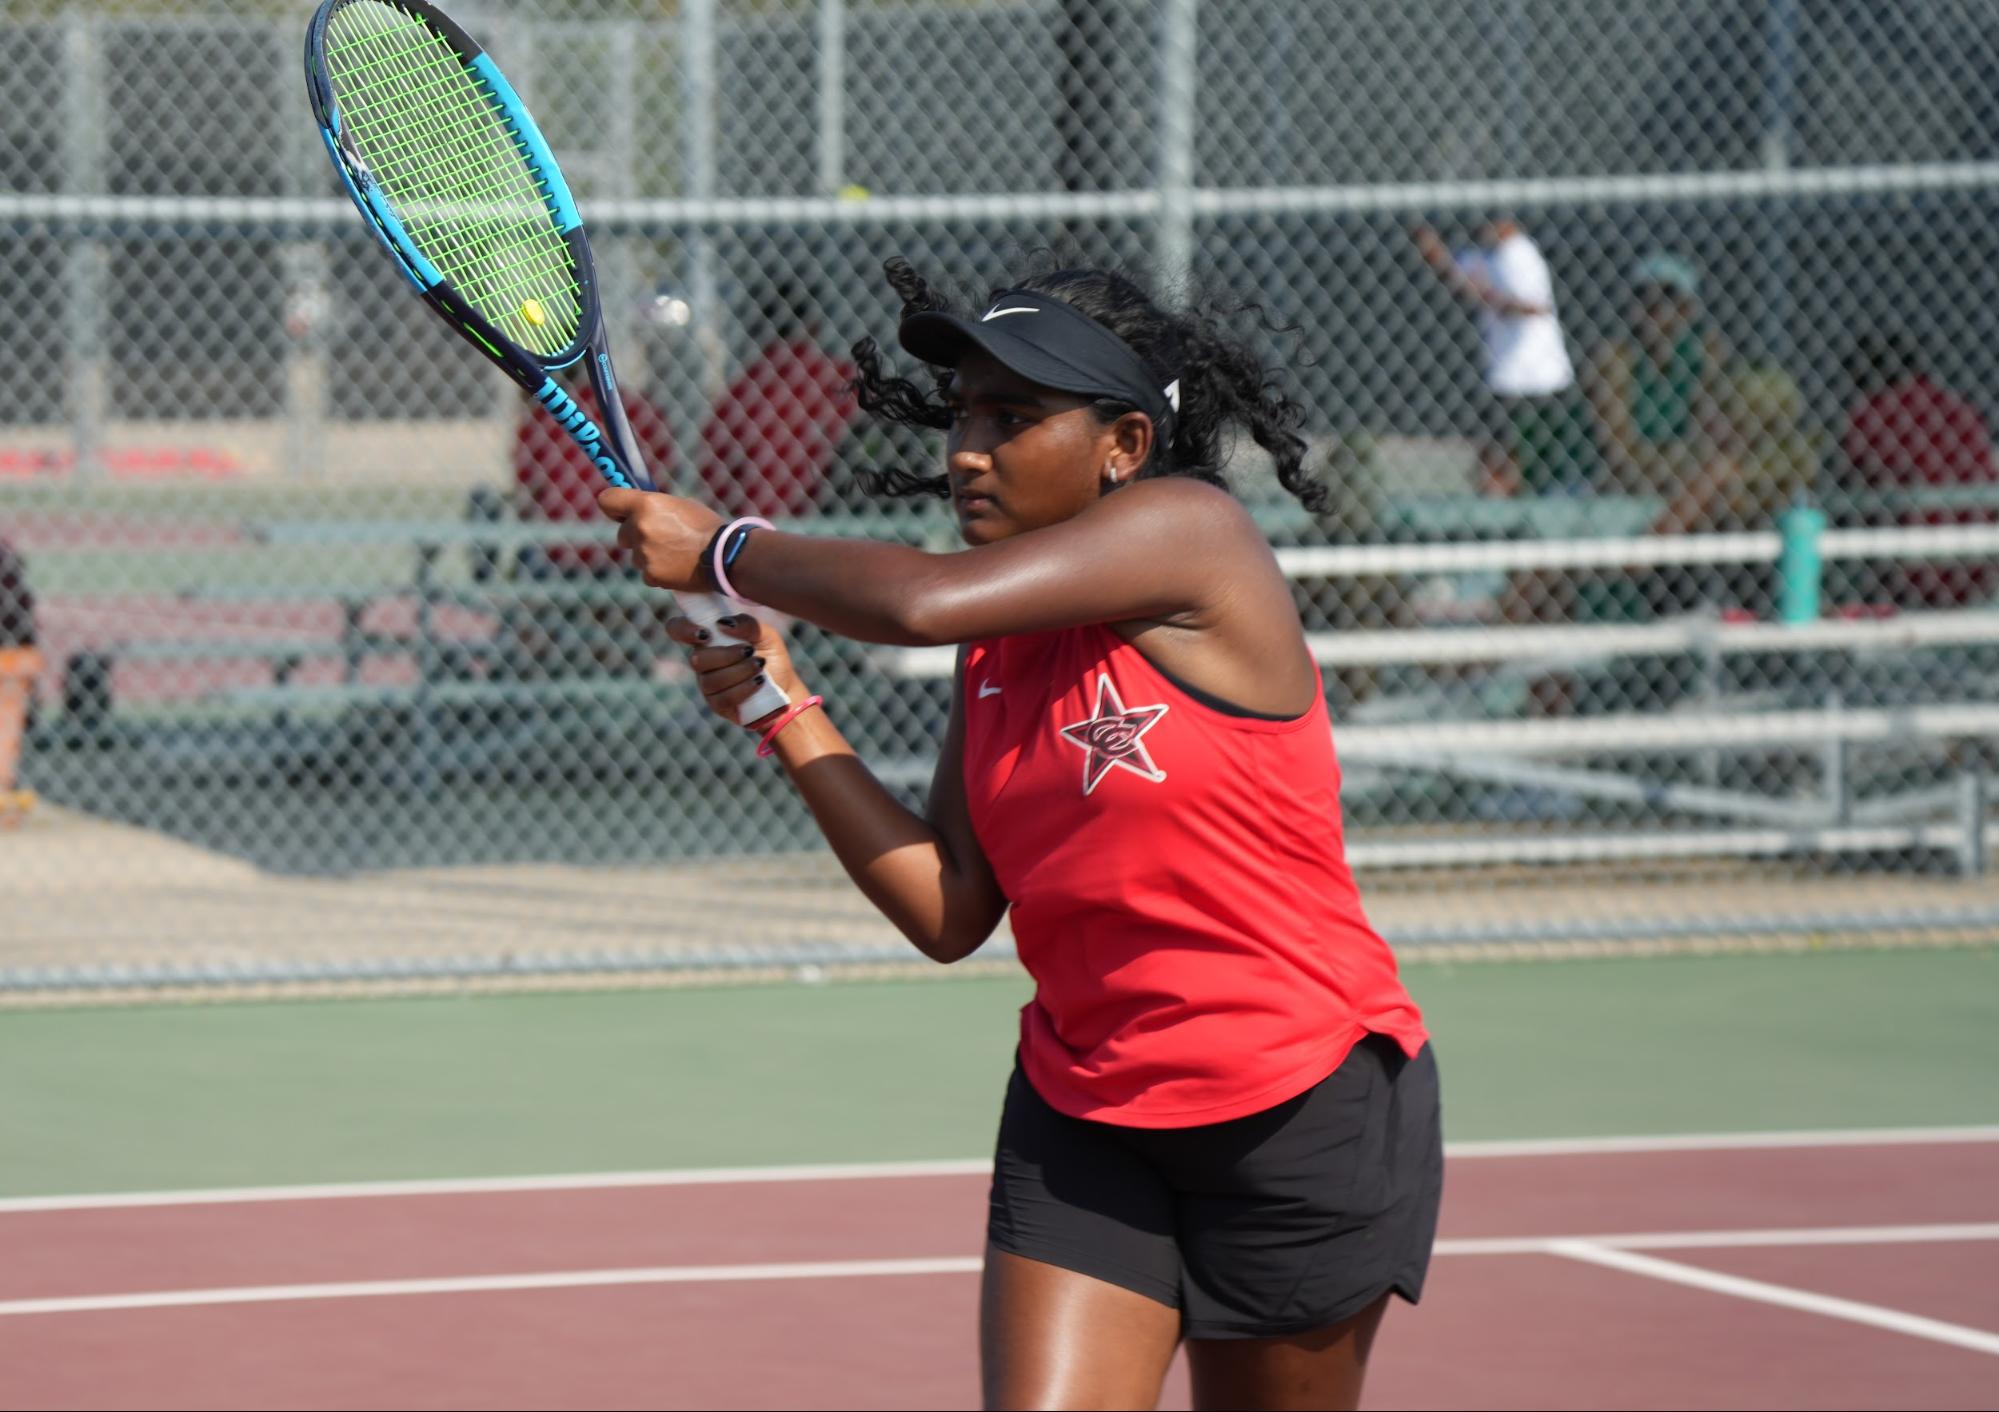 Coppell junior Sarayu Thallapareddy hits a forehand during practice last Friday. Coppell tennis team made a comeback when playing against Flower Mound on Tuesday.